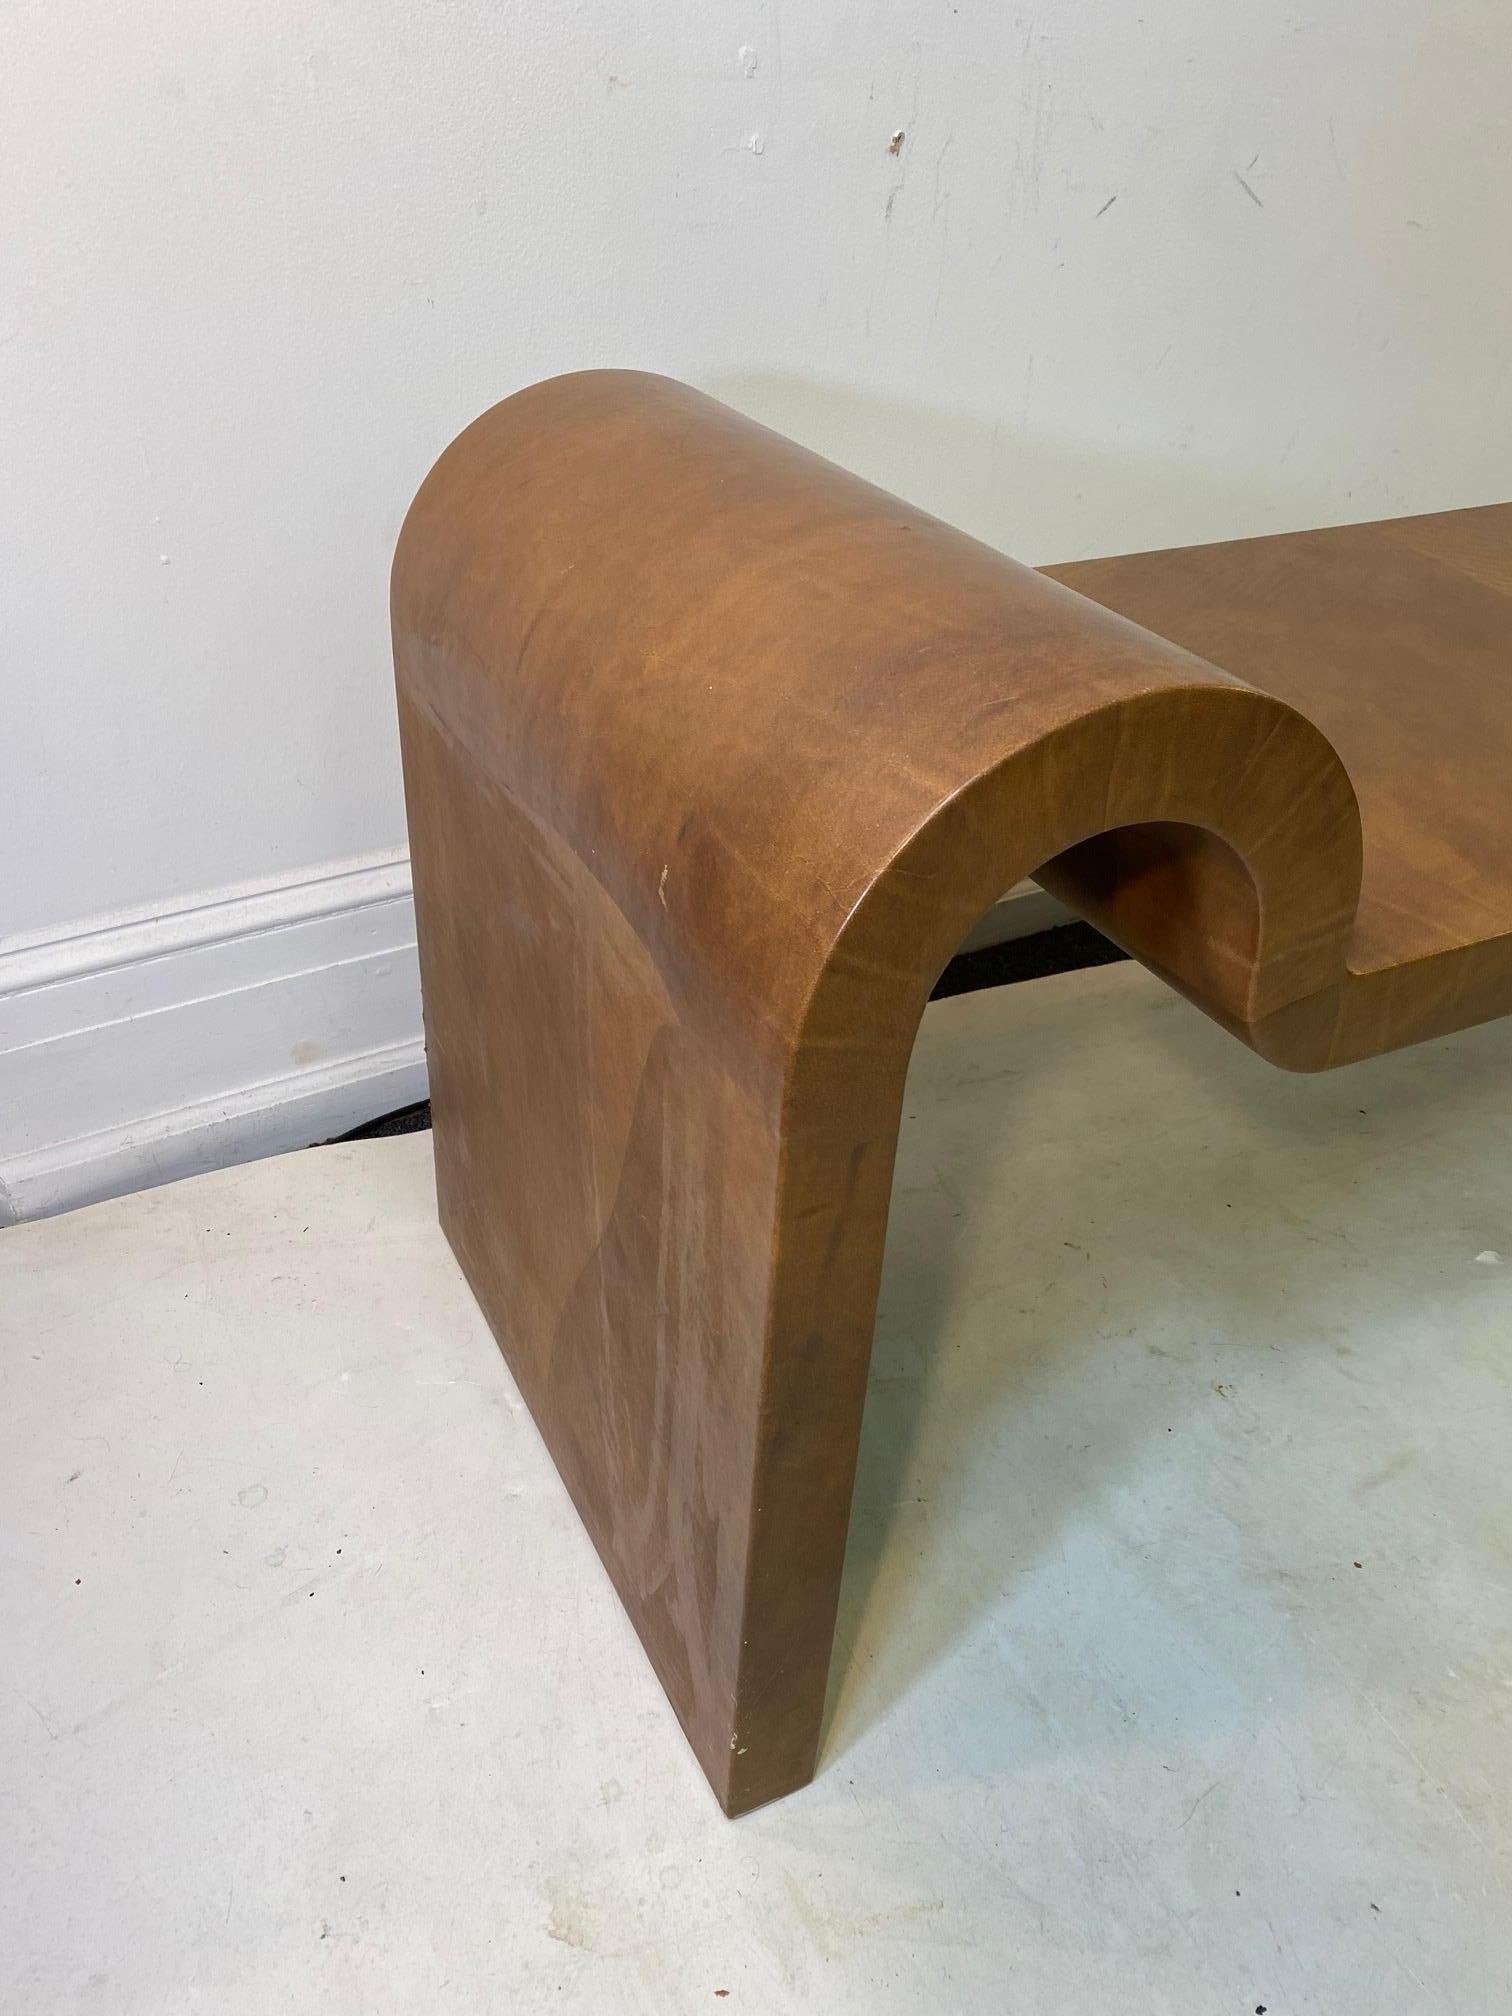 Modern leather surfaced bench with waterfall rounded armrests, made by Karl Springer in 1987. Signed and dated by the designer. The piece is in great vintage condition with age-appropriate wear.